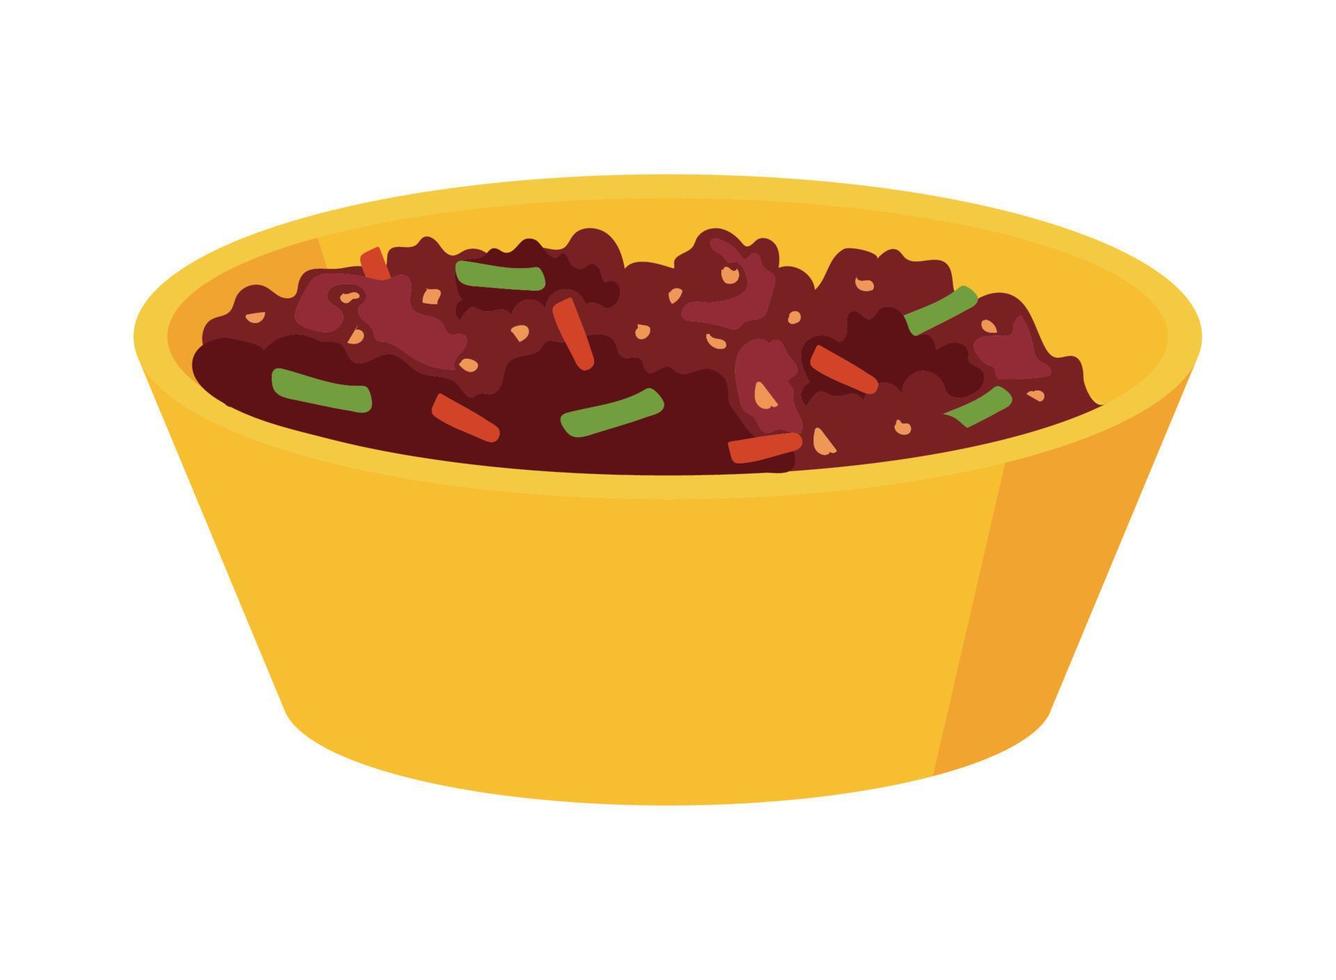 meat in a bowl vector